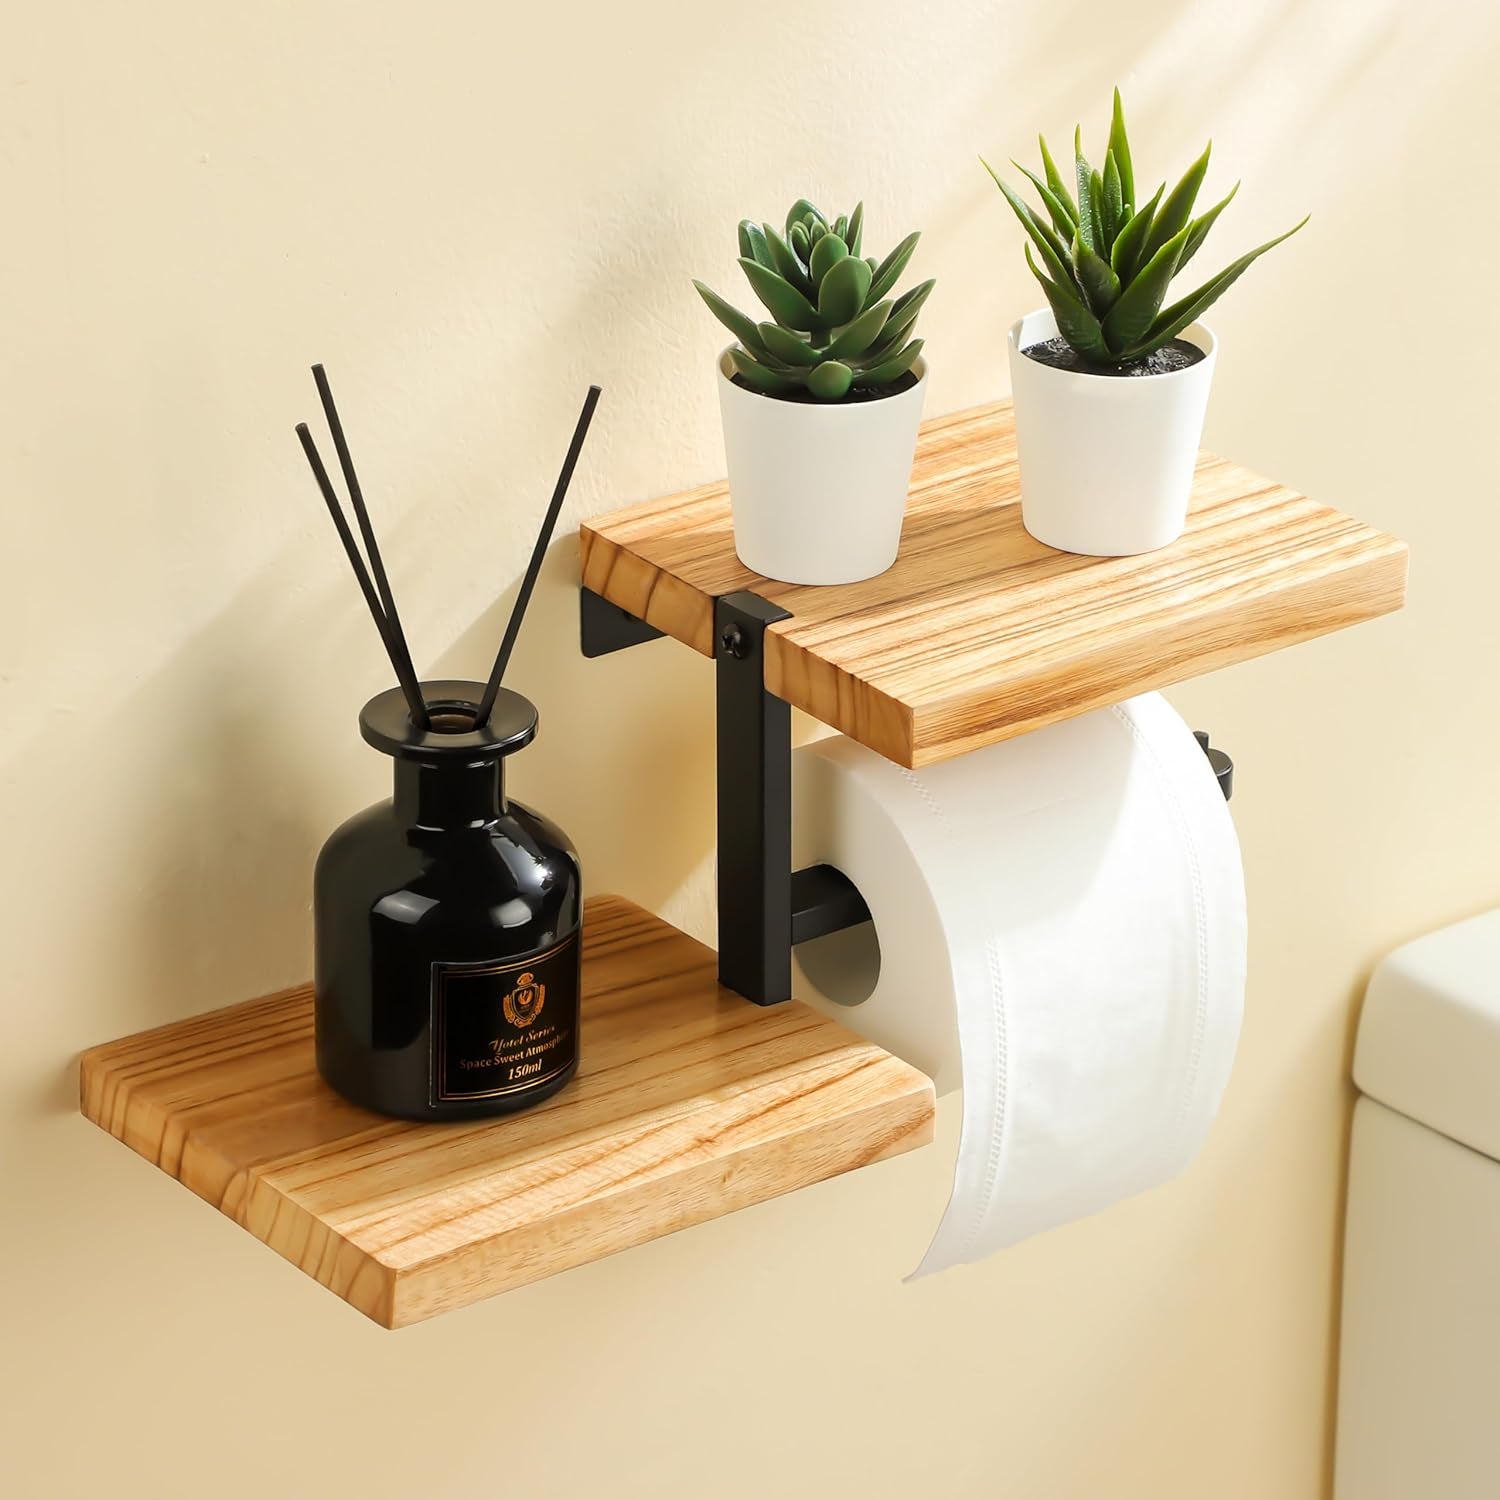 Wood Toilet Paper Holder with Wall Shelf, Farmhouse Bathroom Accessories & Organizer, Wall Mount Toilet Paper Holder Storage, Rustic Toilet Tissue Holder for Bathroom with Double Tier